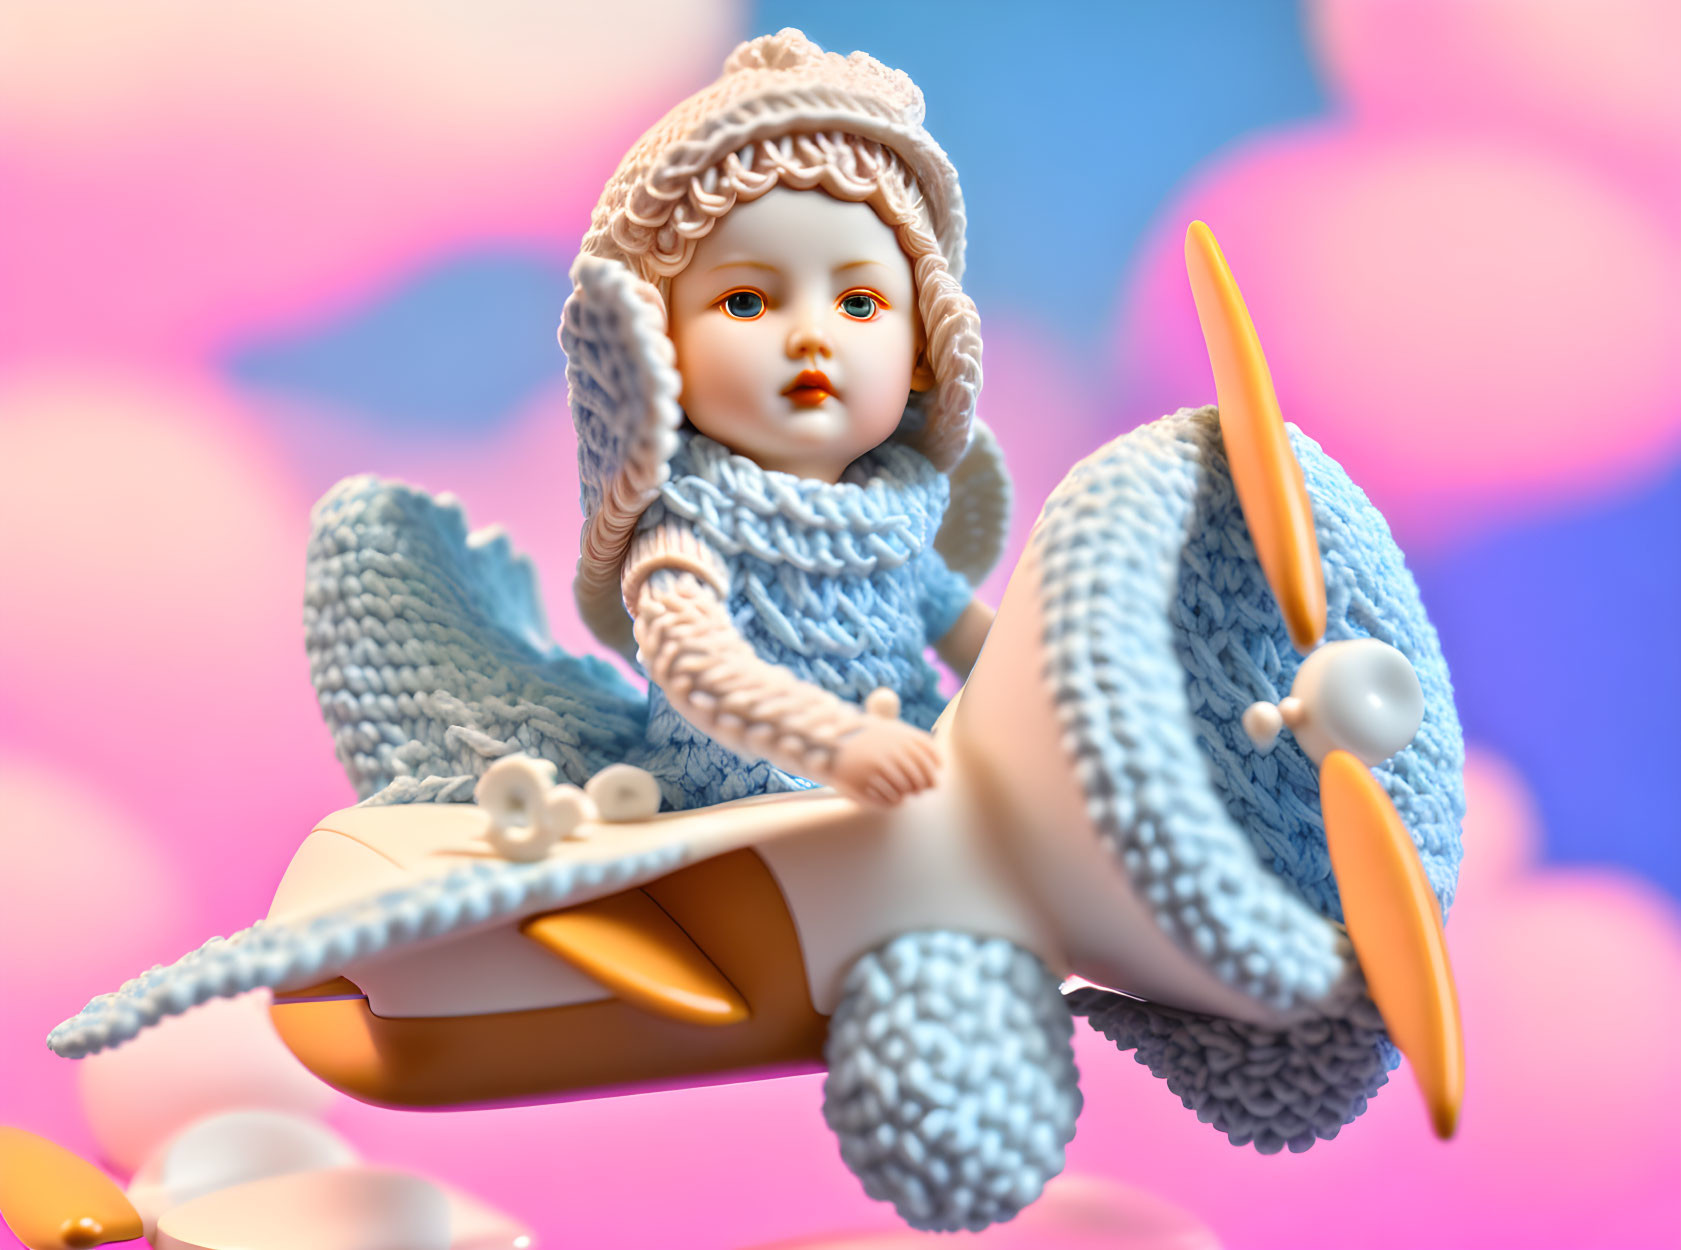 Detailed 3D Rendering: Doll with Bonnet on Stylized Airplane in Pastel Background